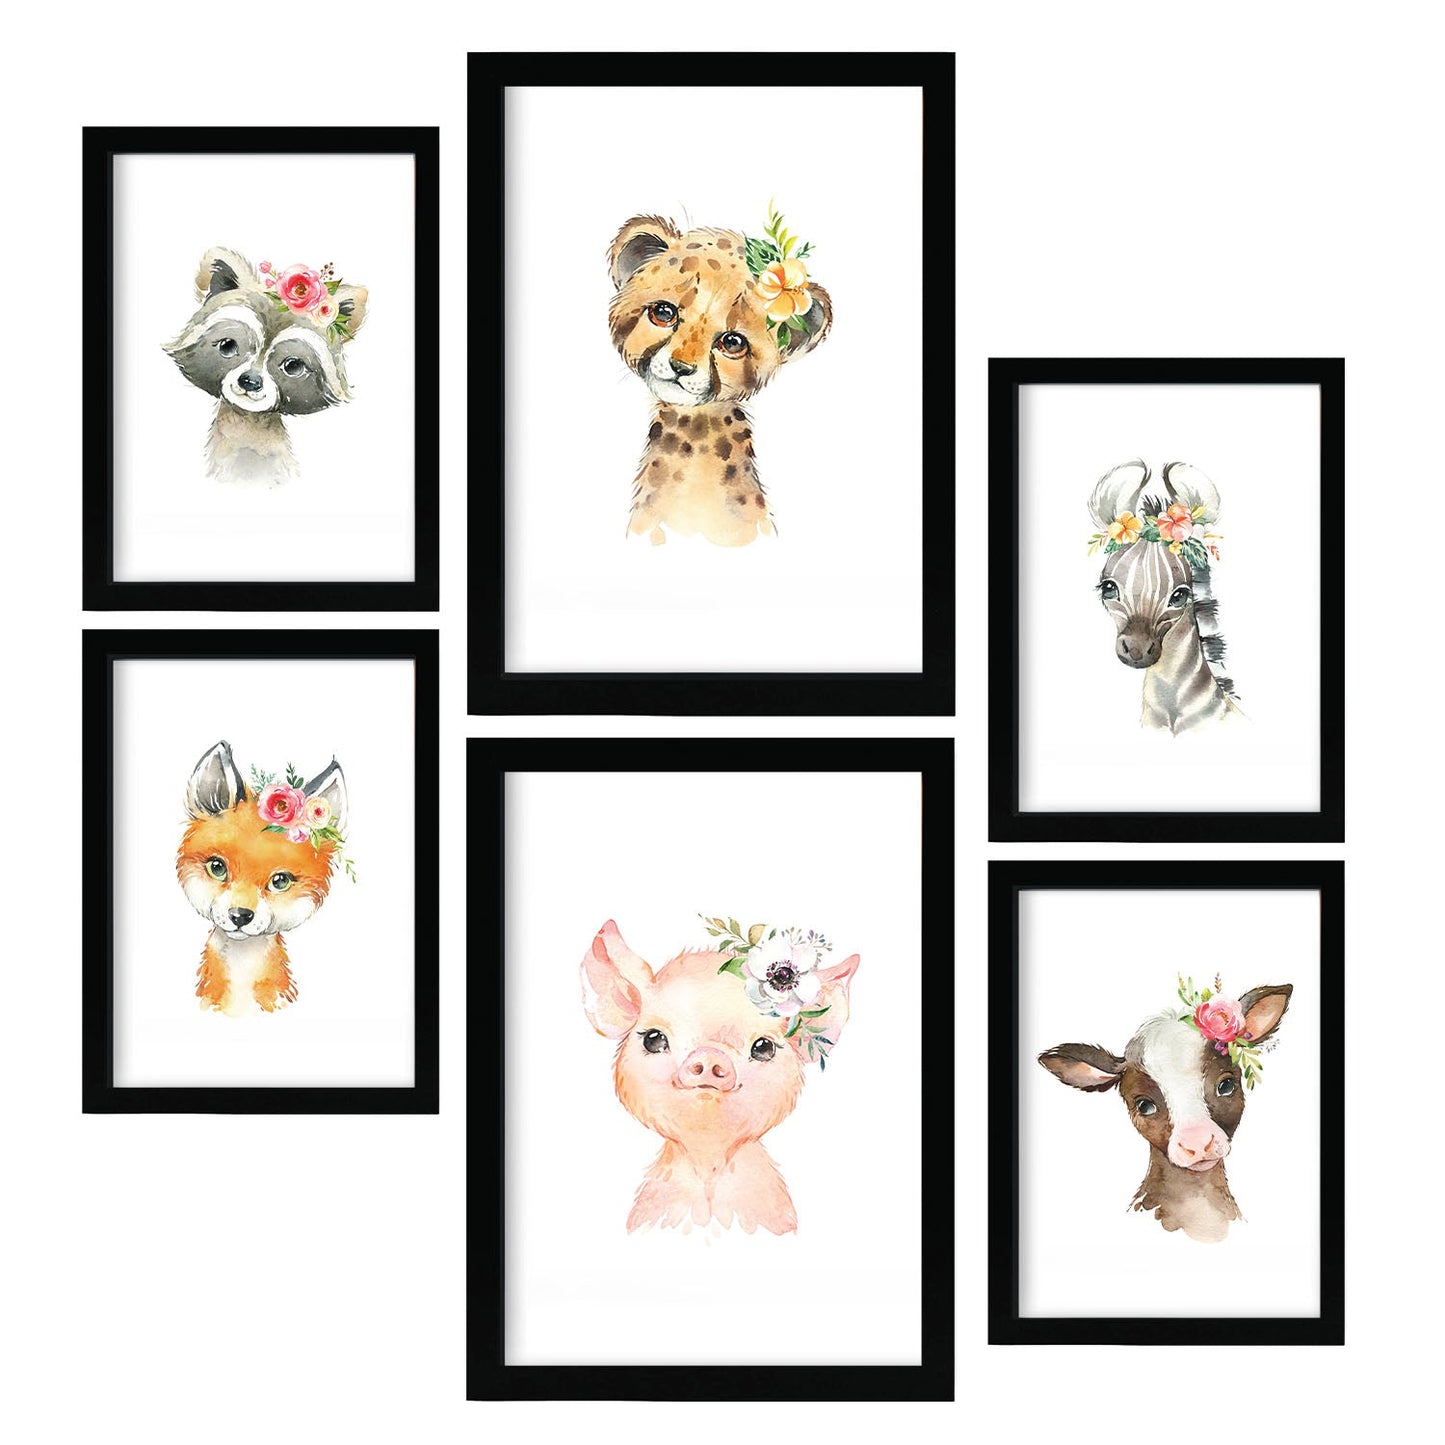 Nacnic animales flores. Aesthetic Wall Art Prints for Bedroom or Living Room Design.